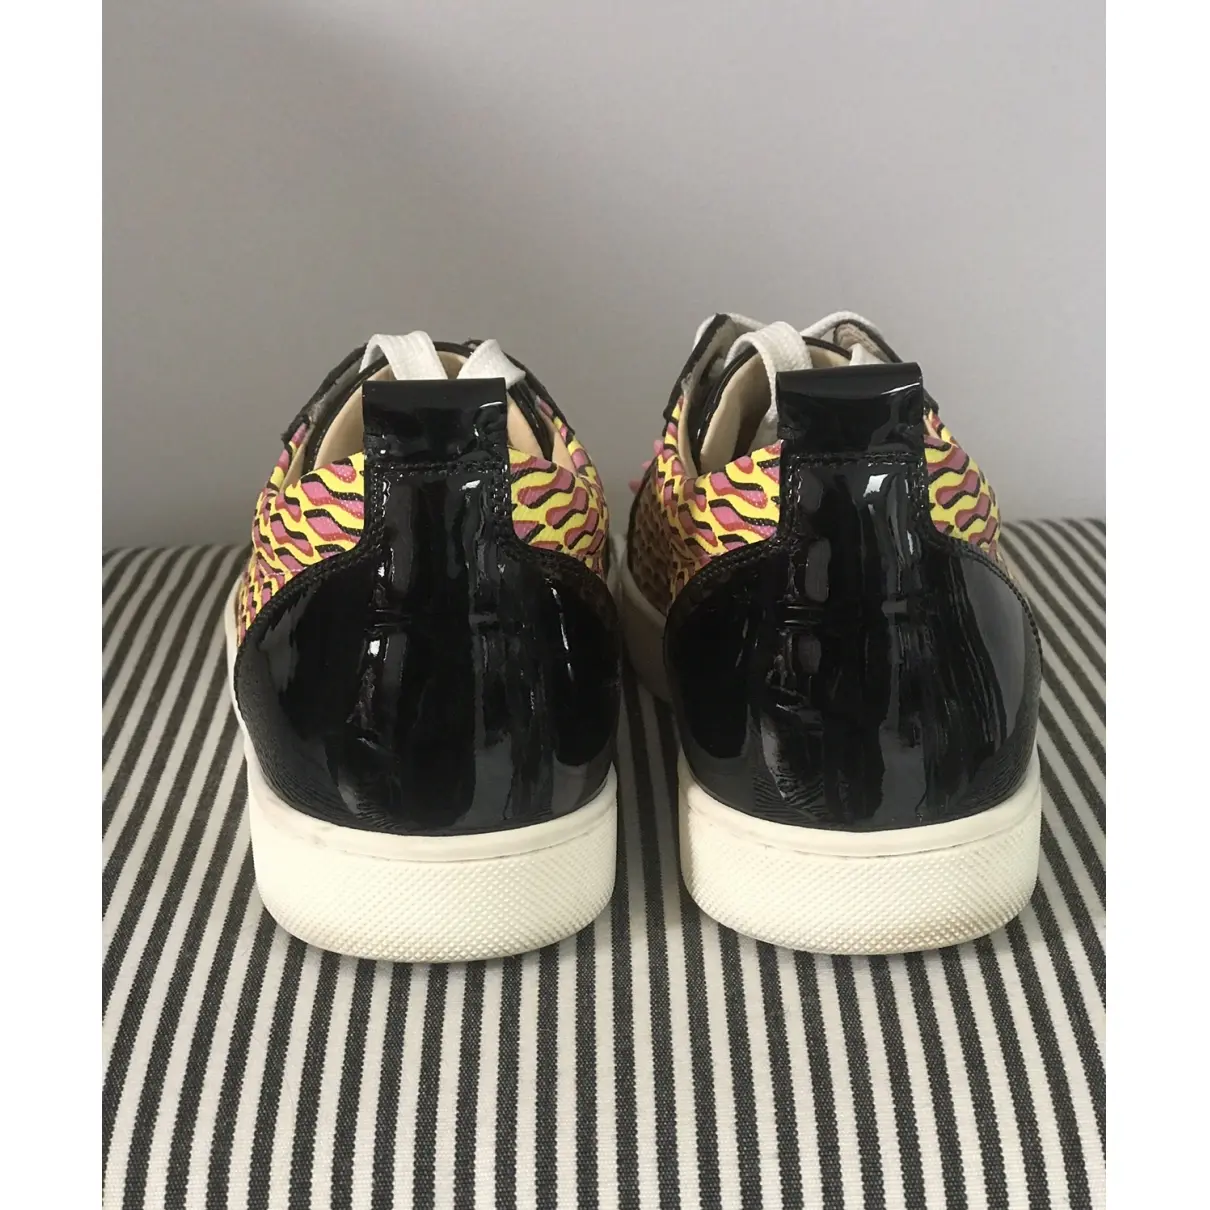 Buy Christian Louboutin Gondolita patent leather trainers online